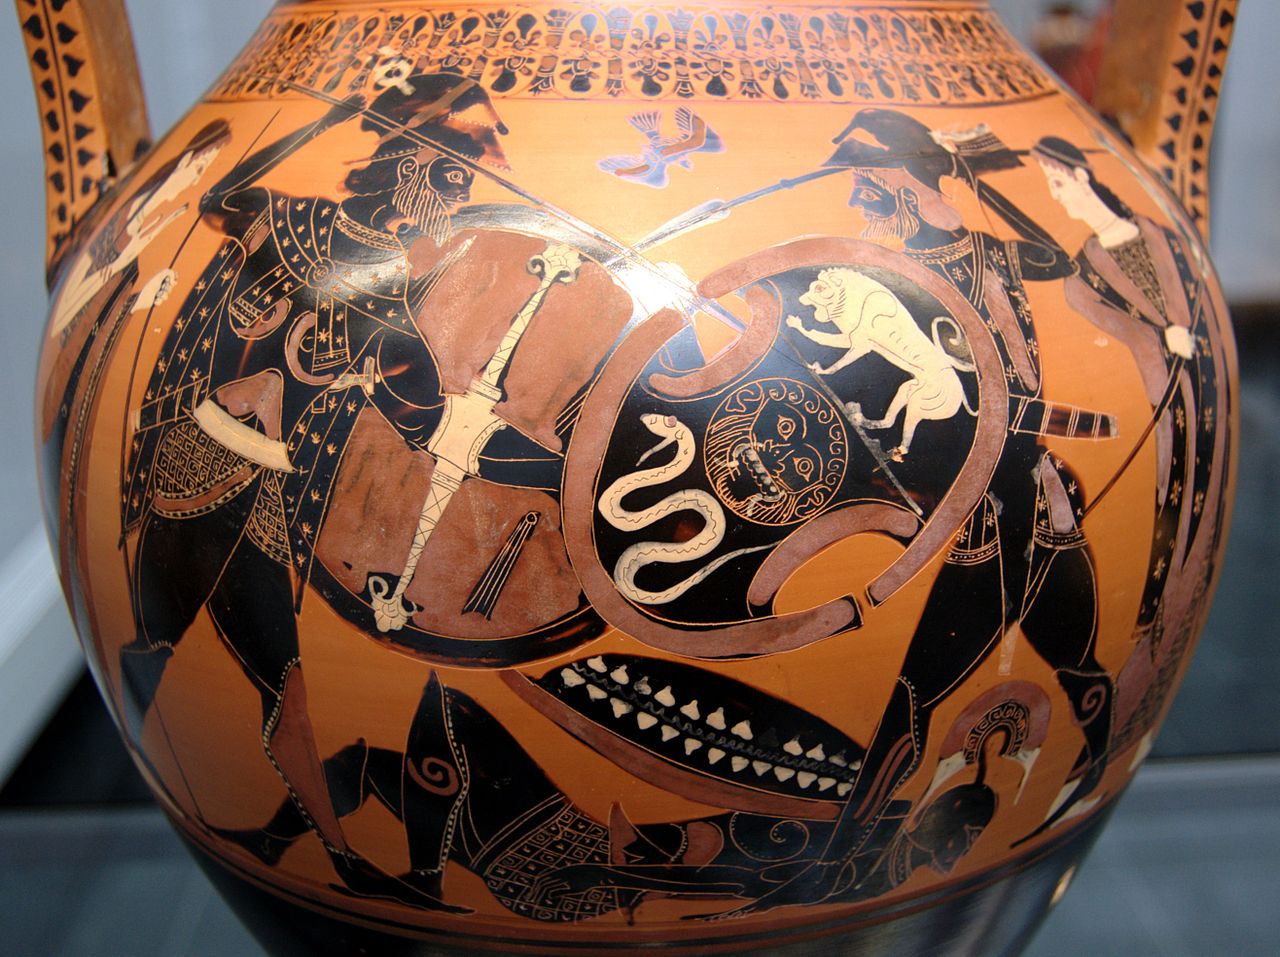 Achilles fighting Memnon during the Trojan War, depicted on a vase from Vulci, 510 BCE.